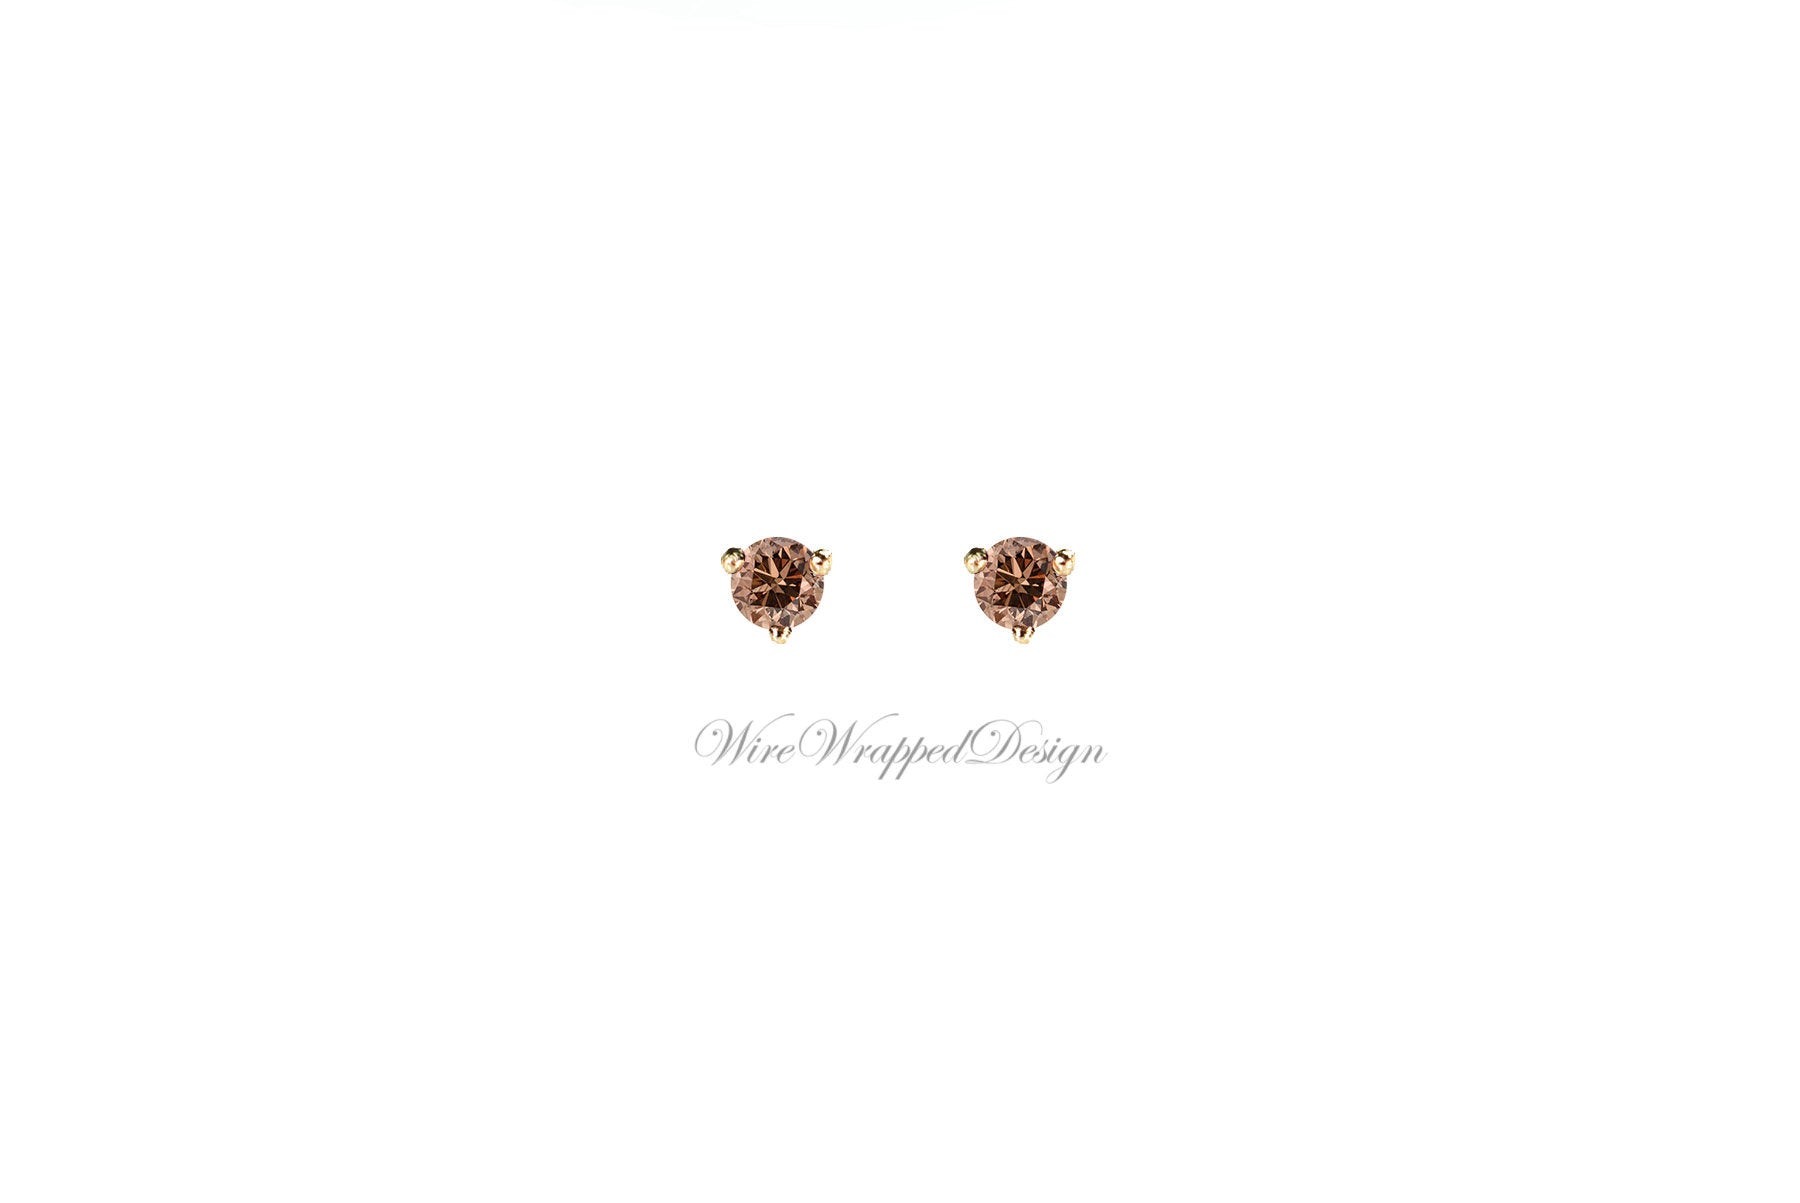 PAIR Genuine COGNAC DIAMOND Earrings Studs 2.5mm 0.12tcw Martini 14k Solid Gold (Yellow, Rose, White) Platinum Silver Cartilage Tragus Brown